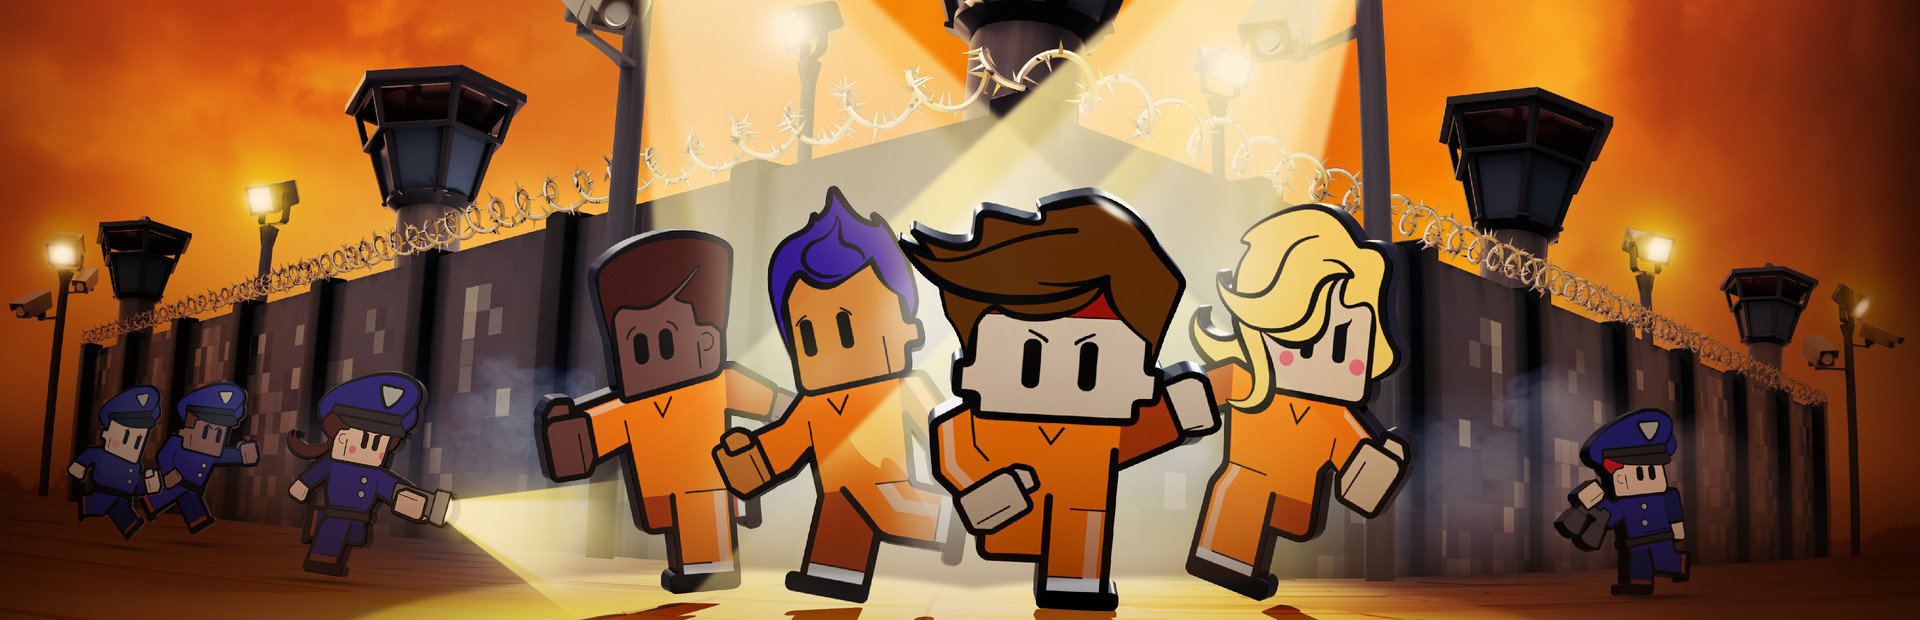 The Escapists 2 cover image